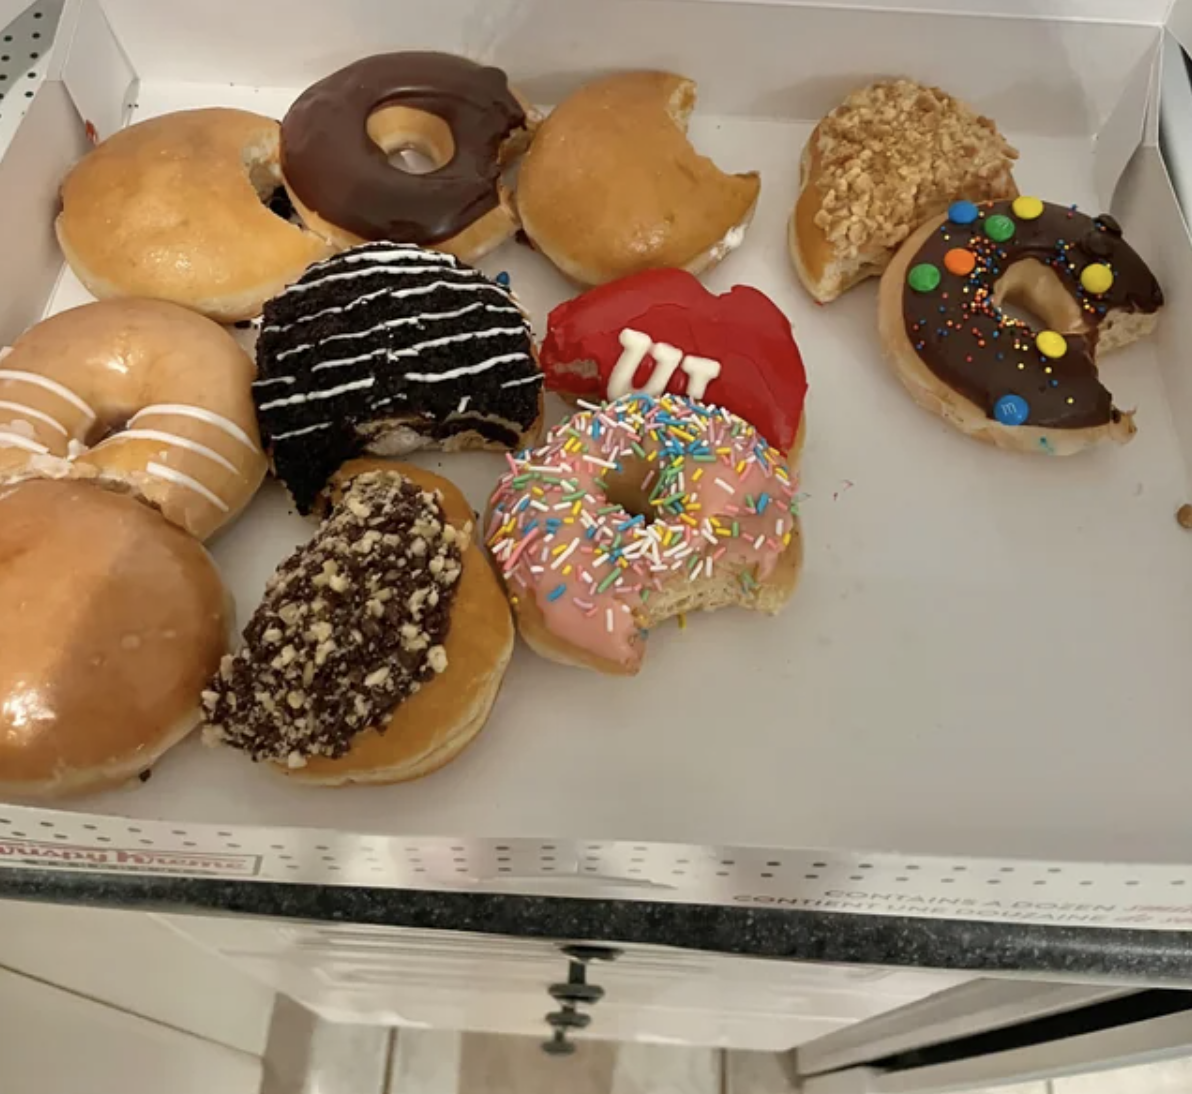 a single bit in almost all the donuts in the box